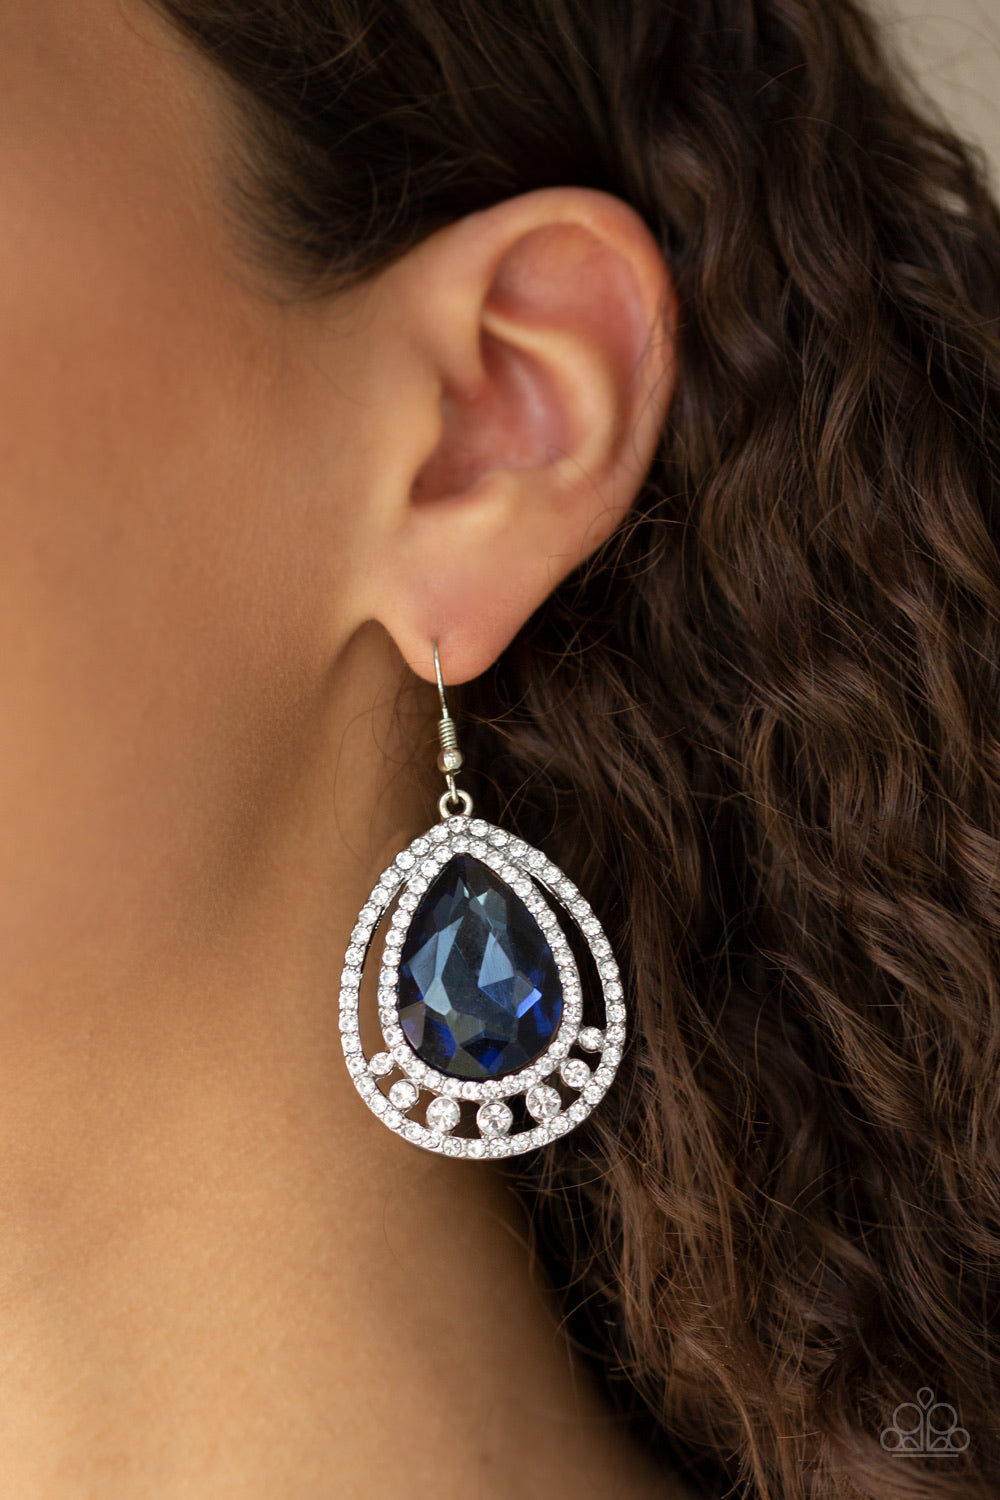 All Rise For Her Majesty Blue-Earrings